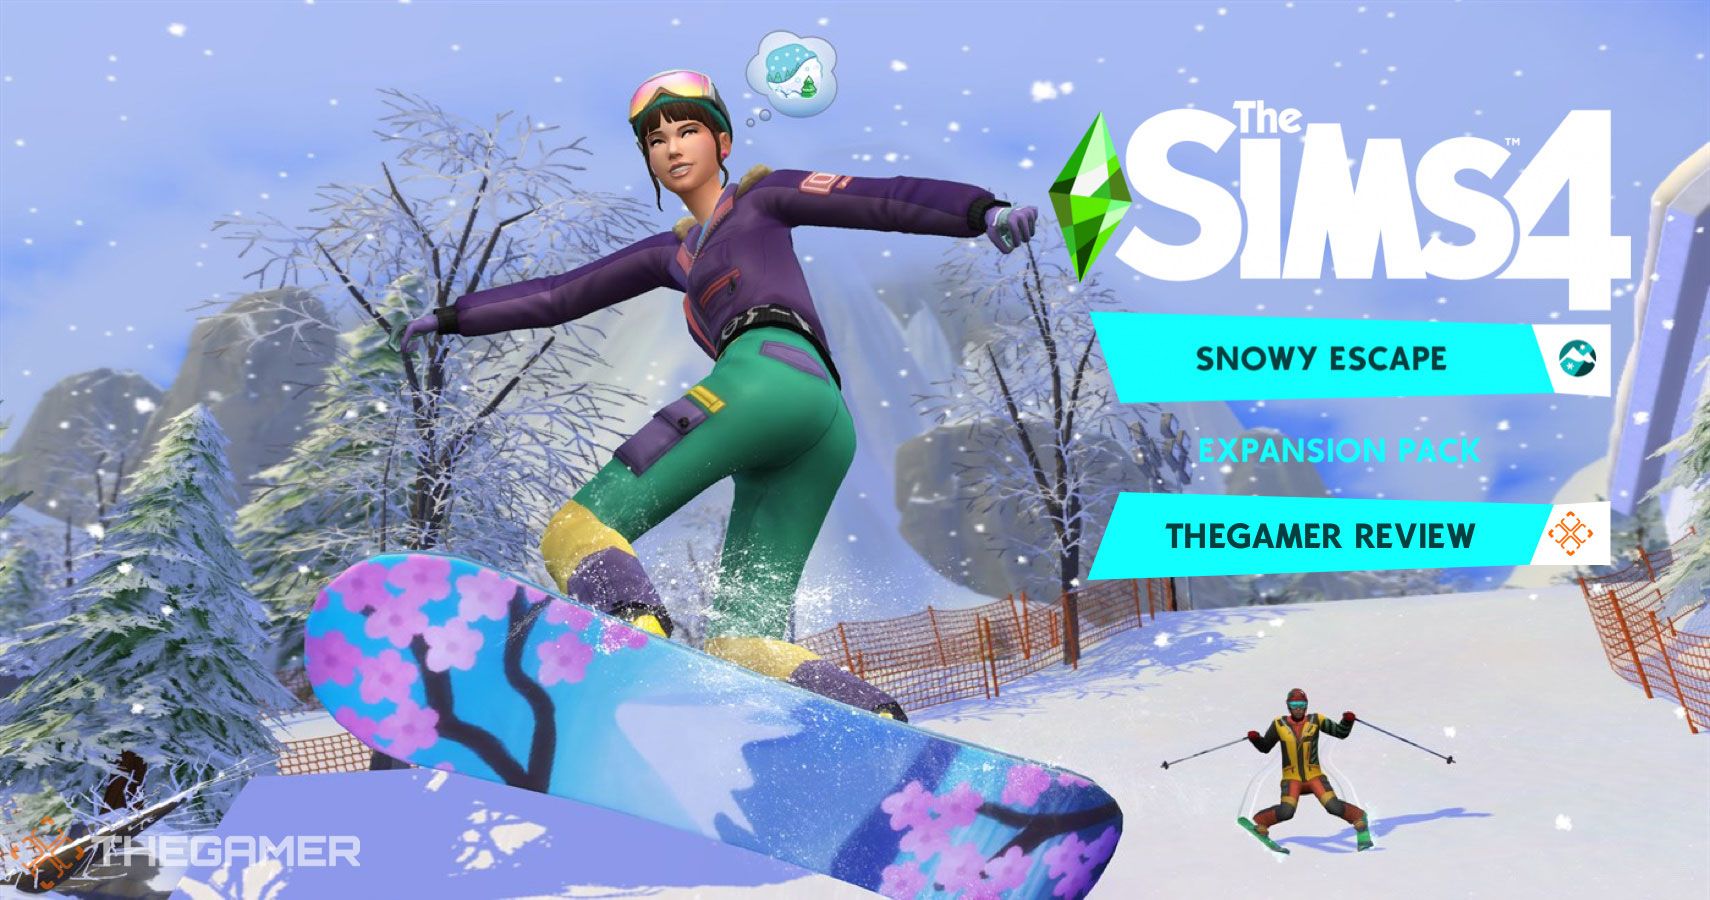 The Sims 4 Snowy Escape Review